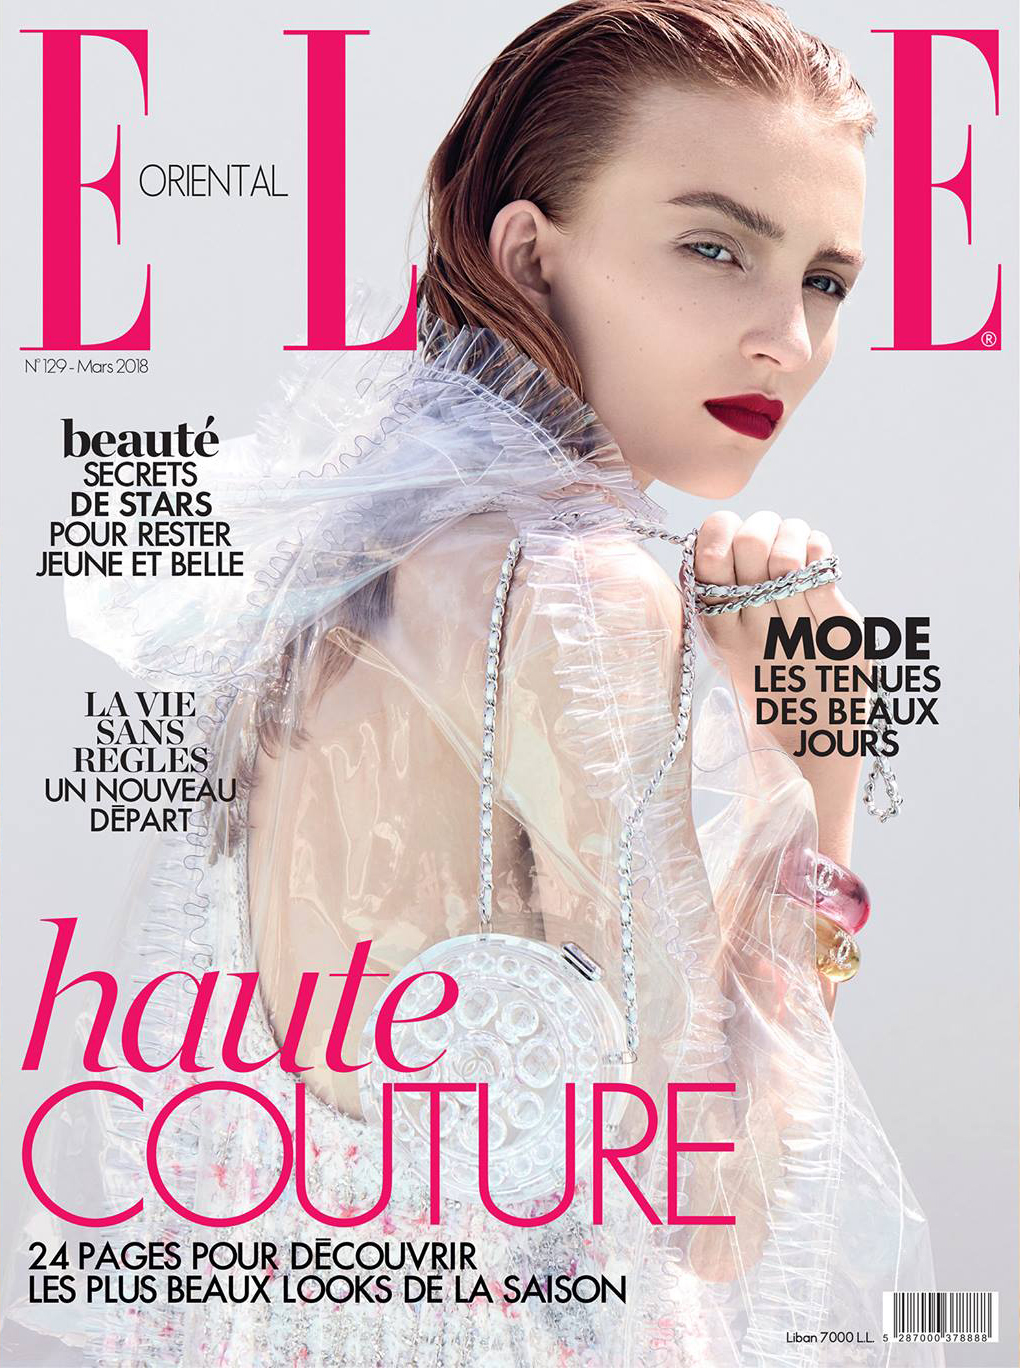 Nicole for Chanel on ELLE Cover auf Behance